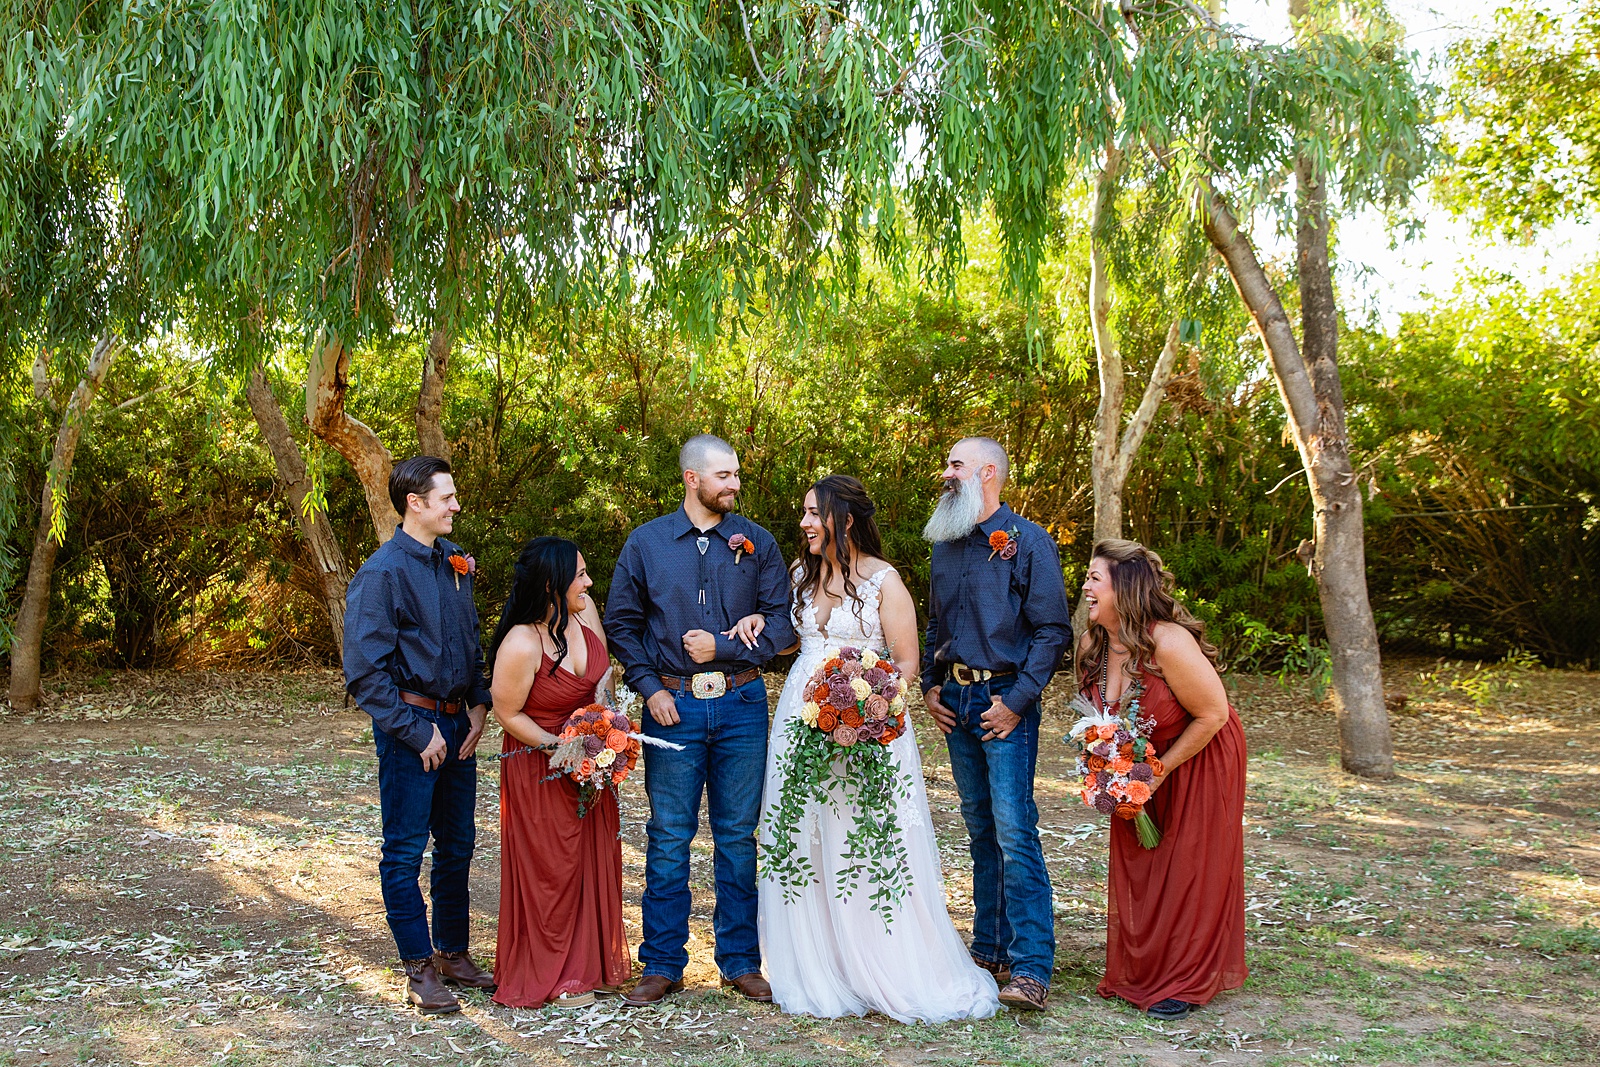 Bridal party laughing together at intimate backyard wedding by Phoenix wedding photographer Juniper and Co Photography.